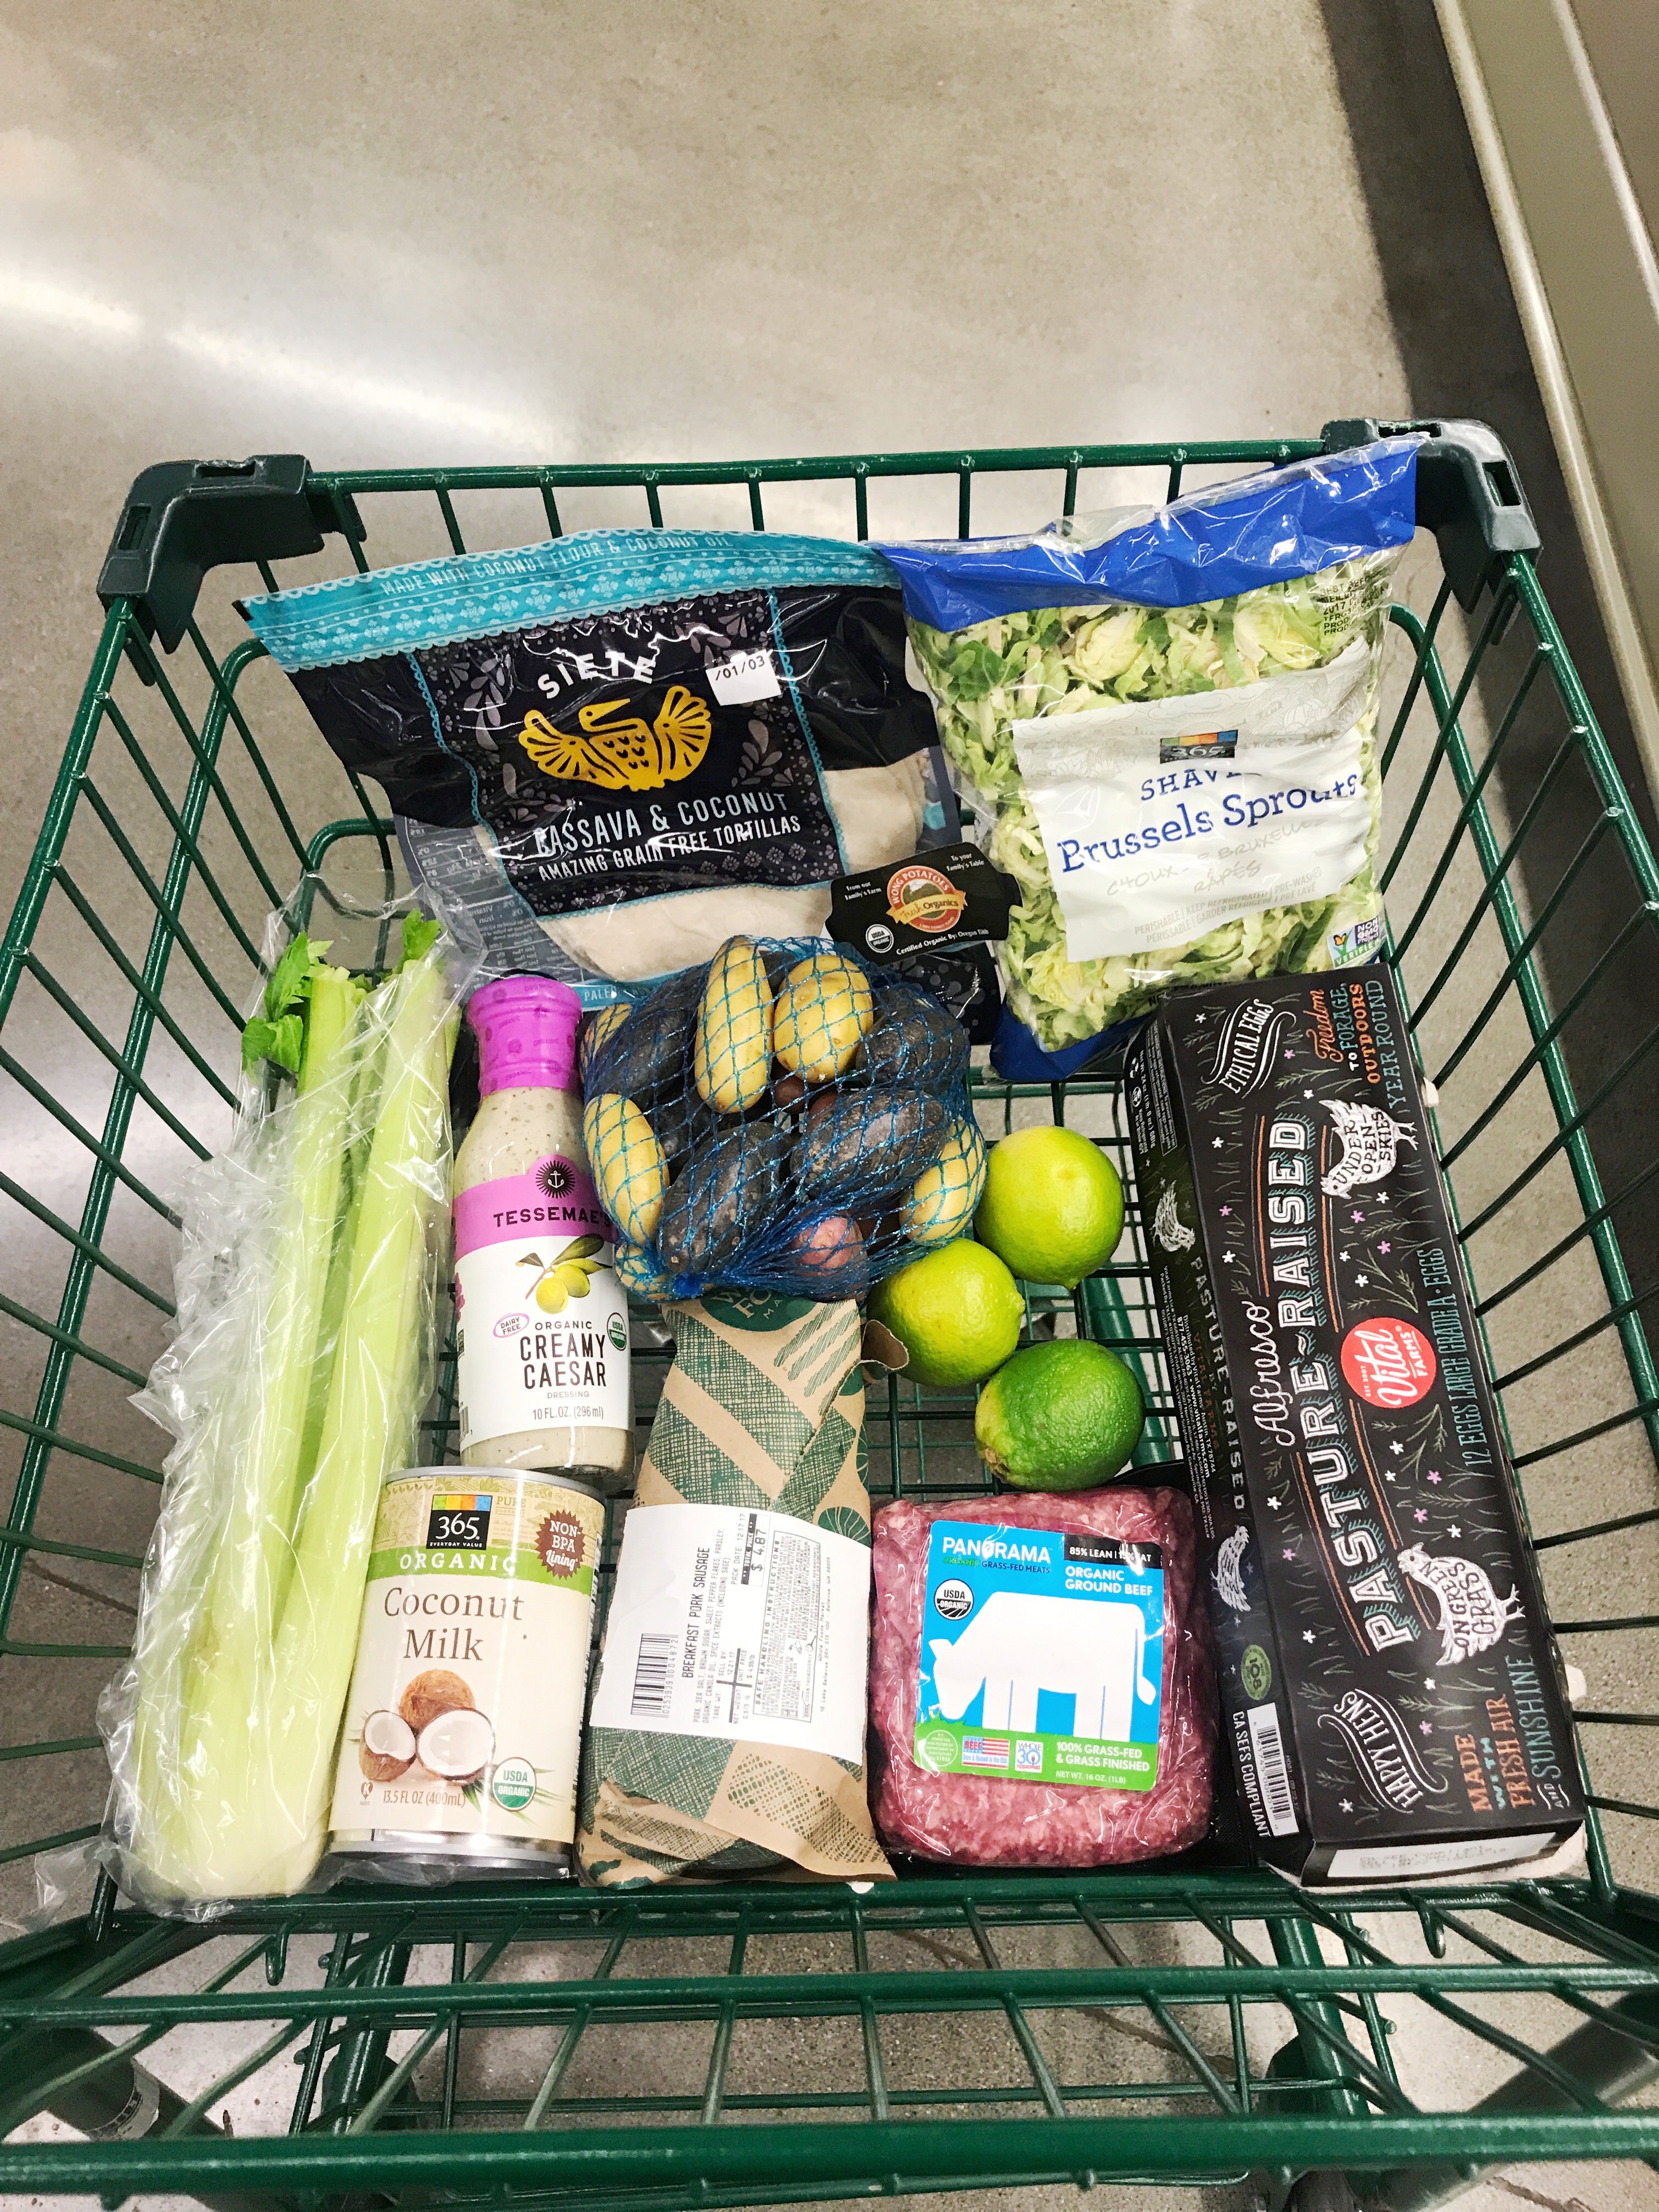 Take a look behind the scenes and peek into my grocery cart. Bonus: you can download a grocery list and meal planning printable!